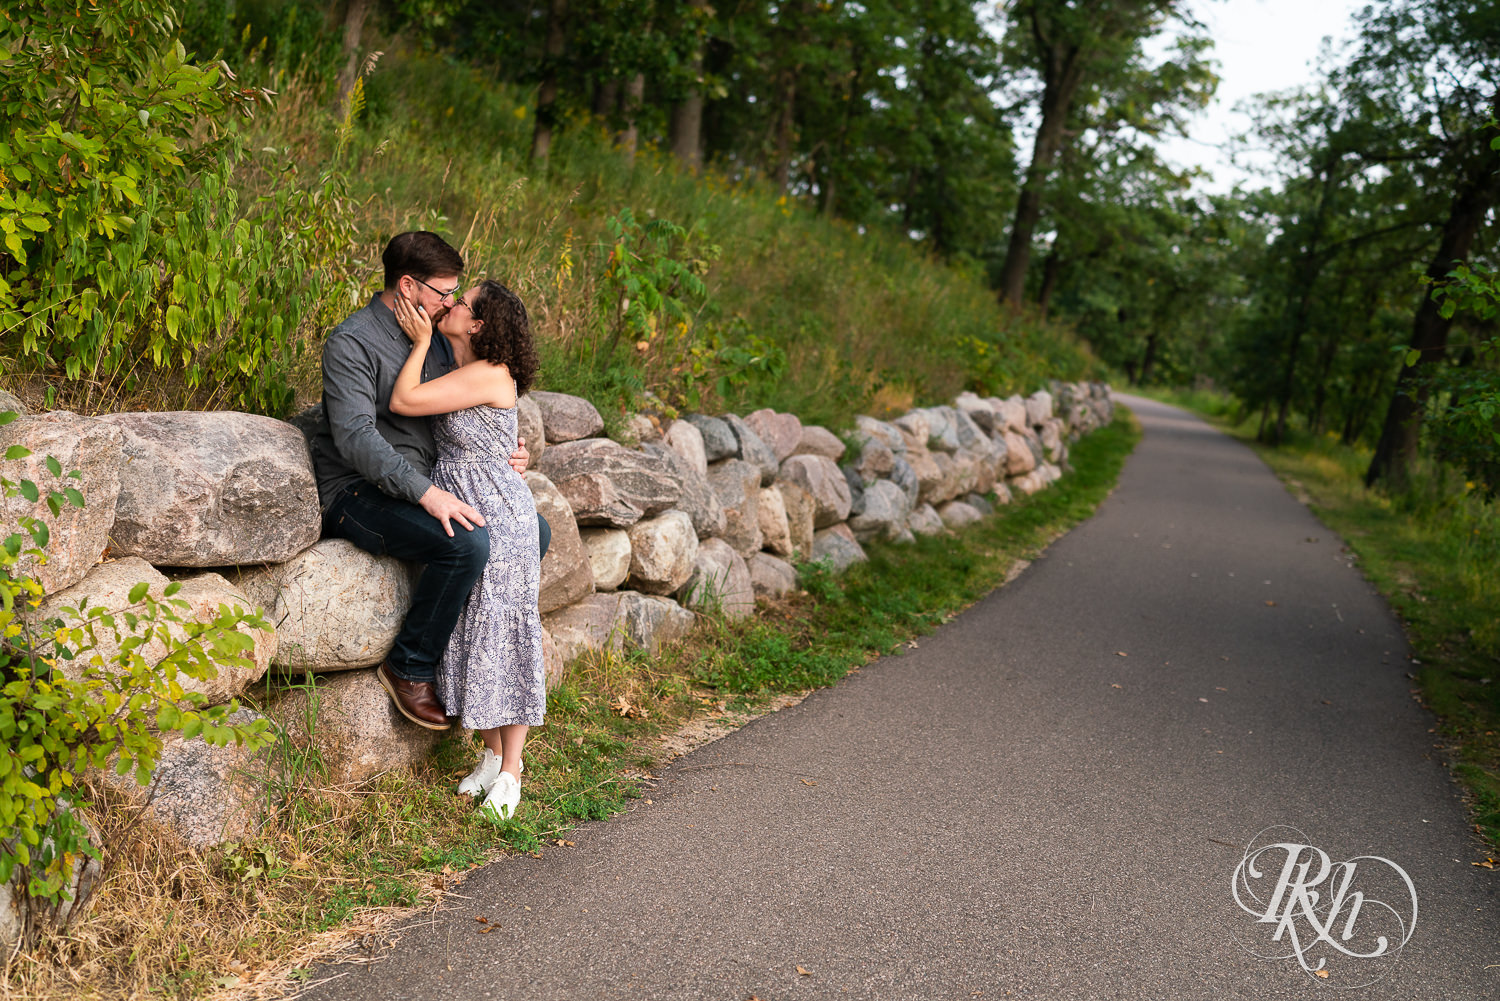 Man and woman hugging at sunset engagement session in Eagan, Minnesota.